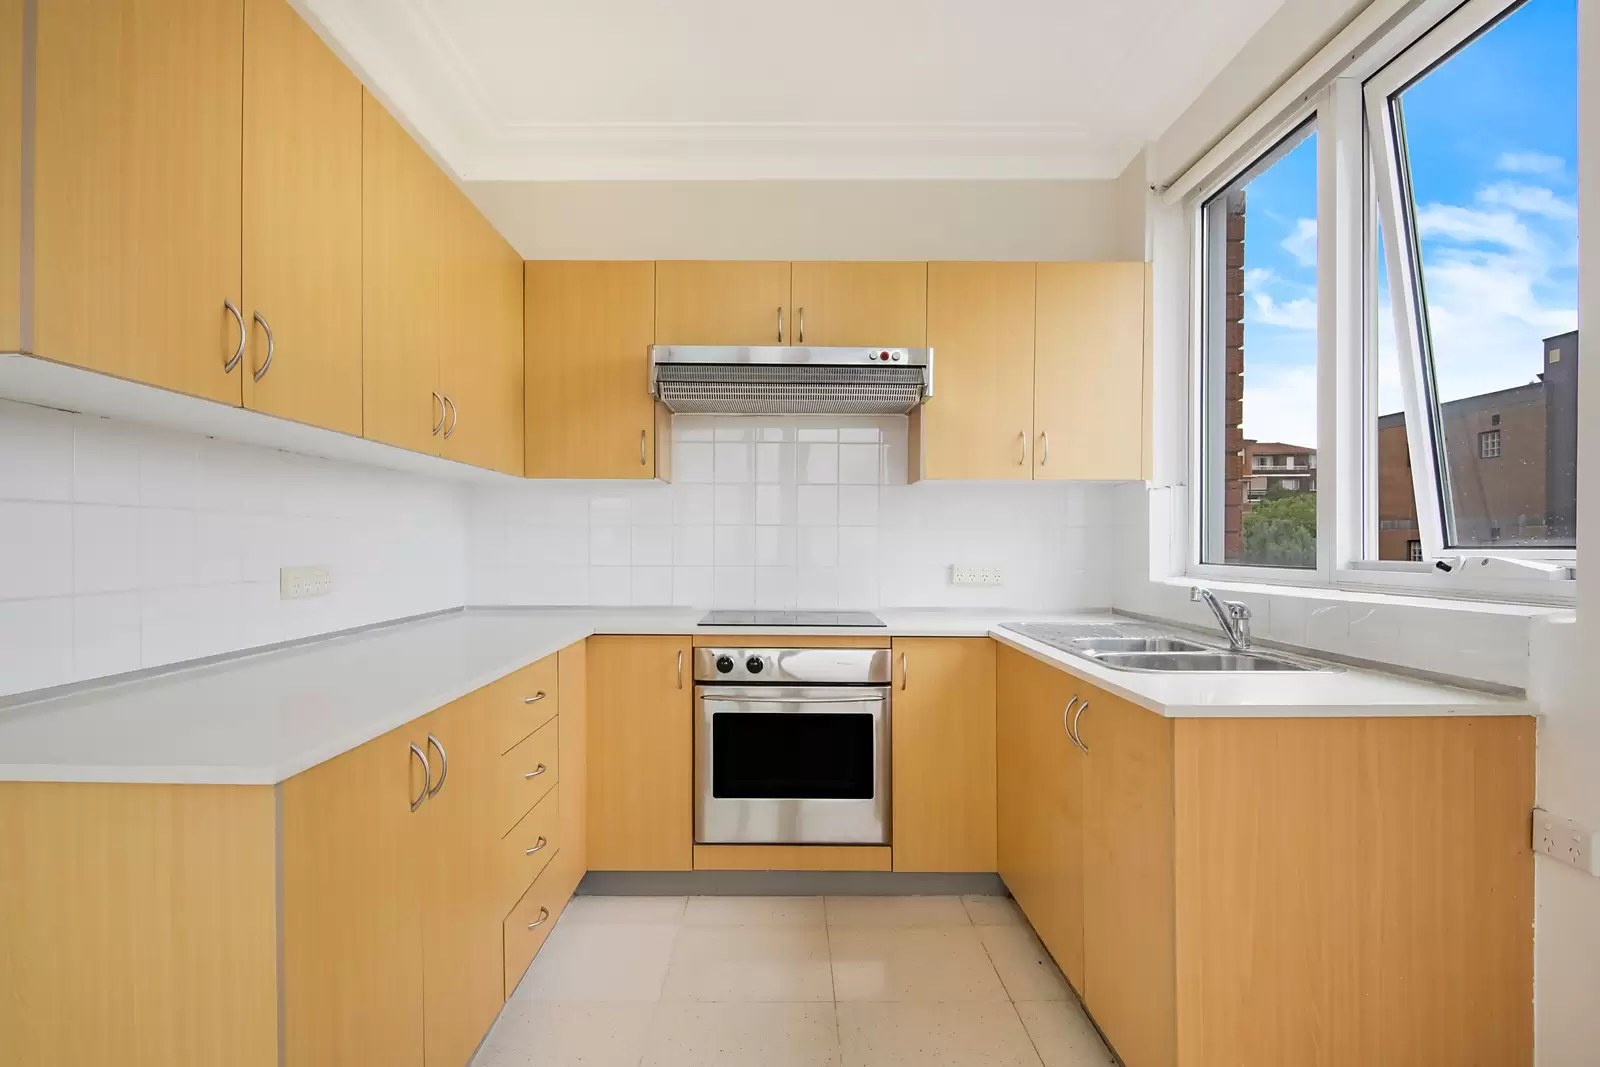 Photo #3: 11/40 Willis St, Kingsford - Sold by Sydney Sotheby's International Realty